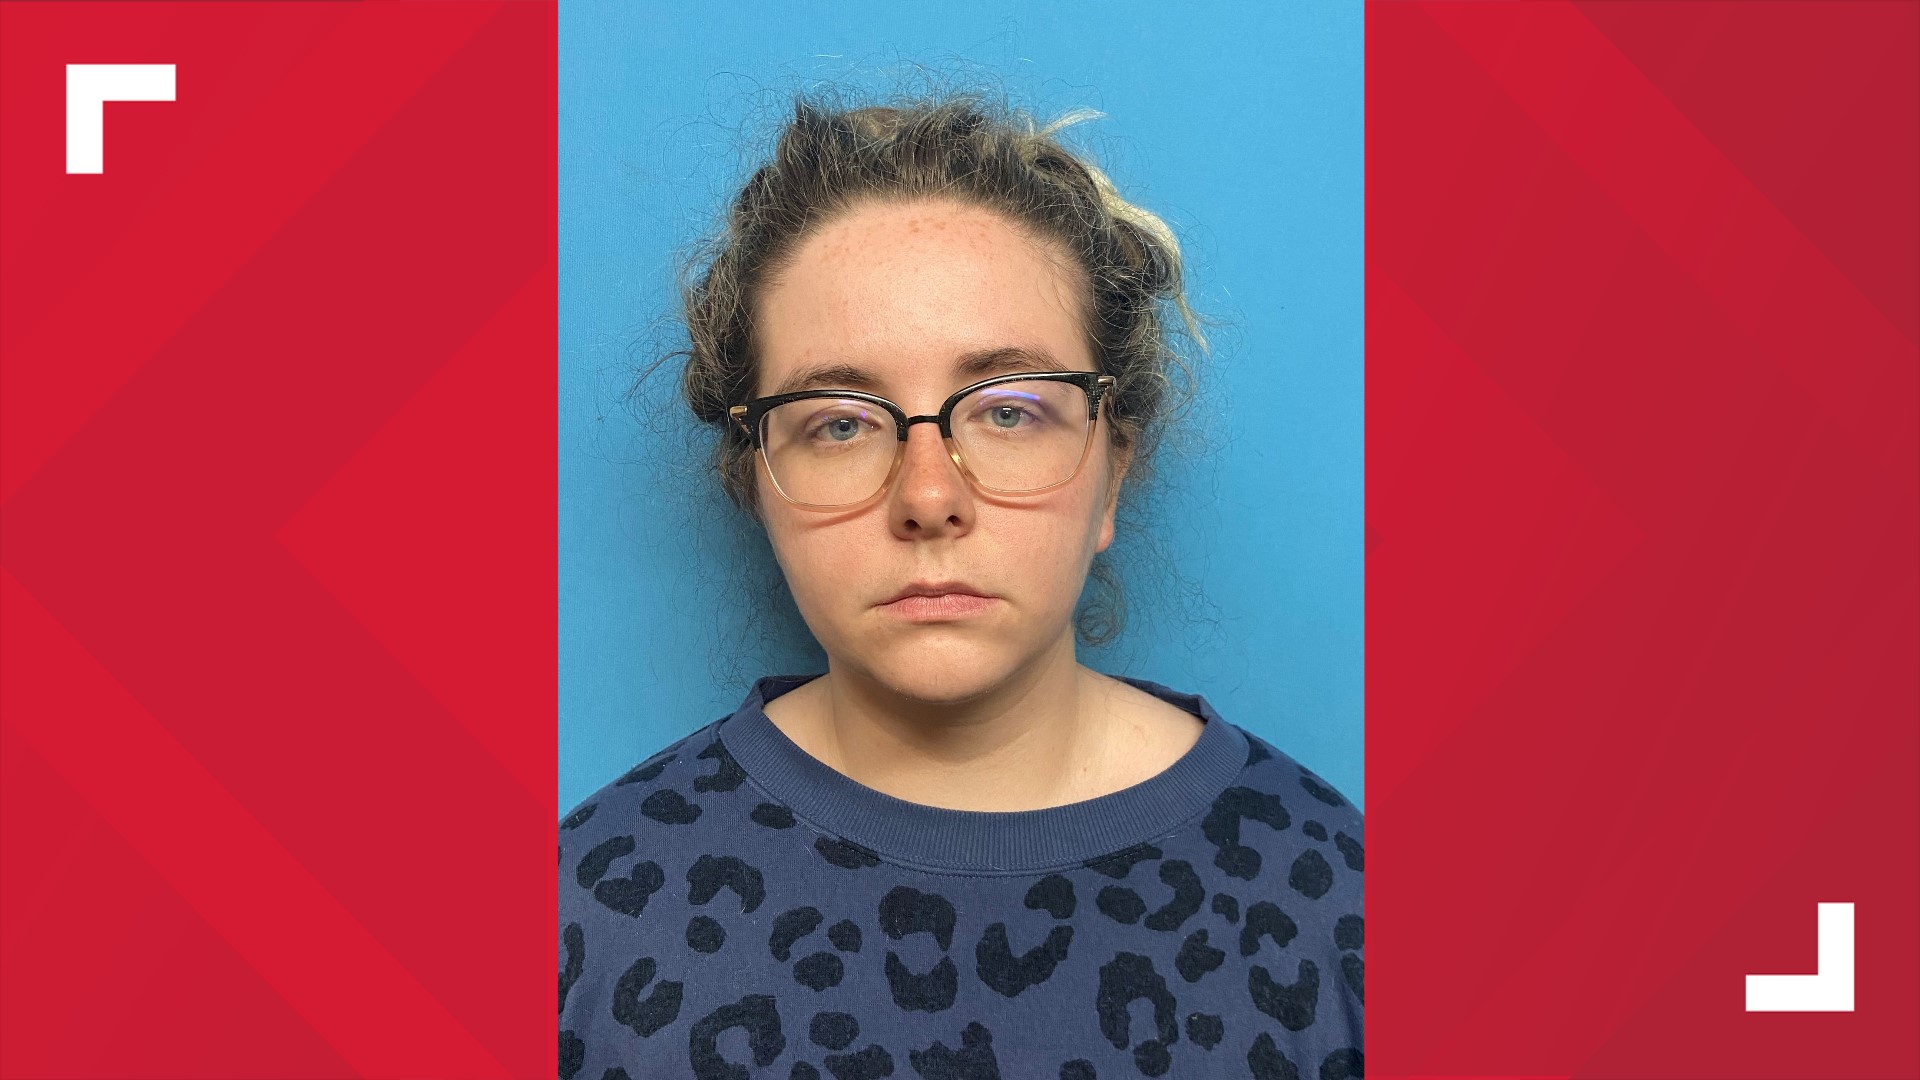 Kaitlyn Raines, who worked as a social studies teacher at Warren Middle School, was arrested and charged with rape and computer exploitation of a child.